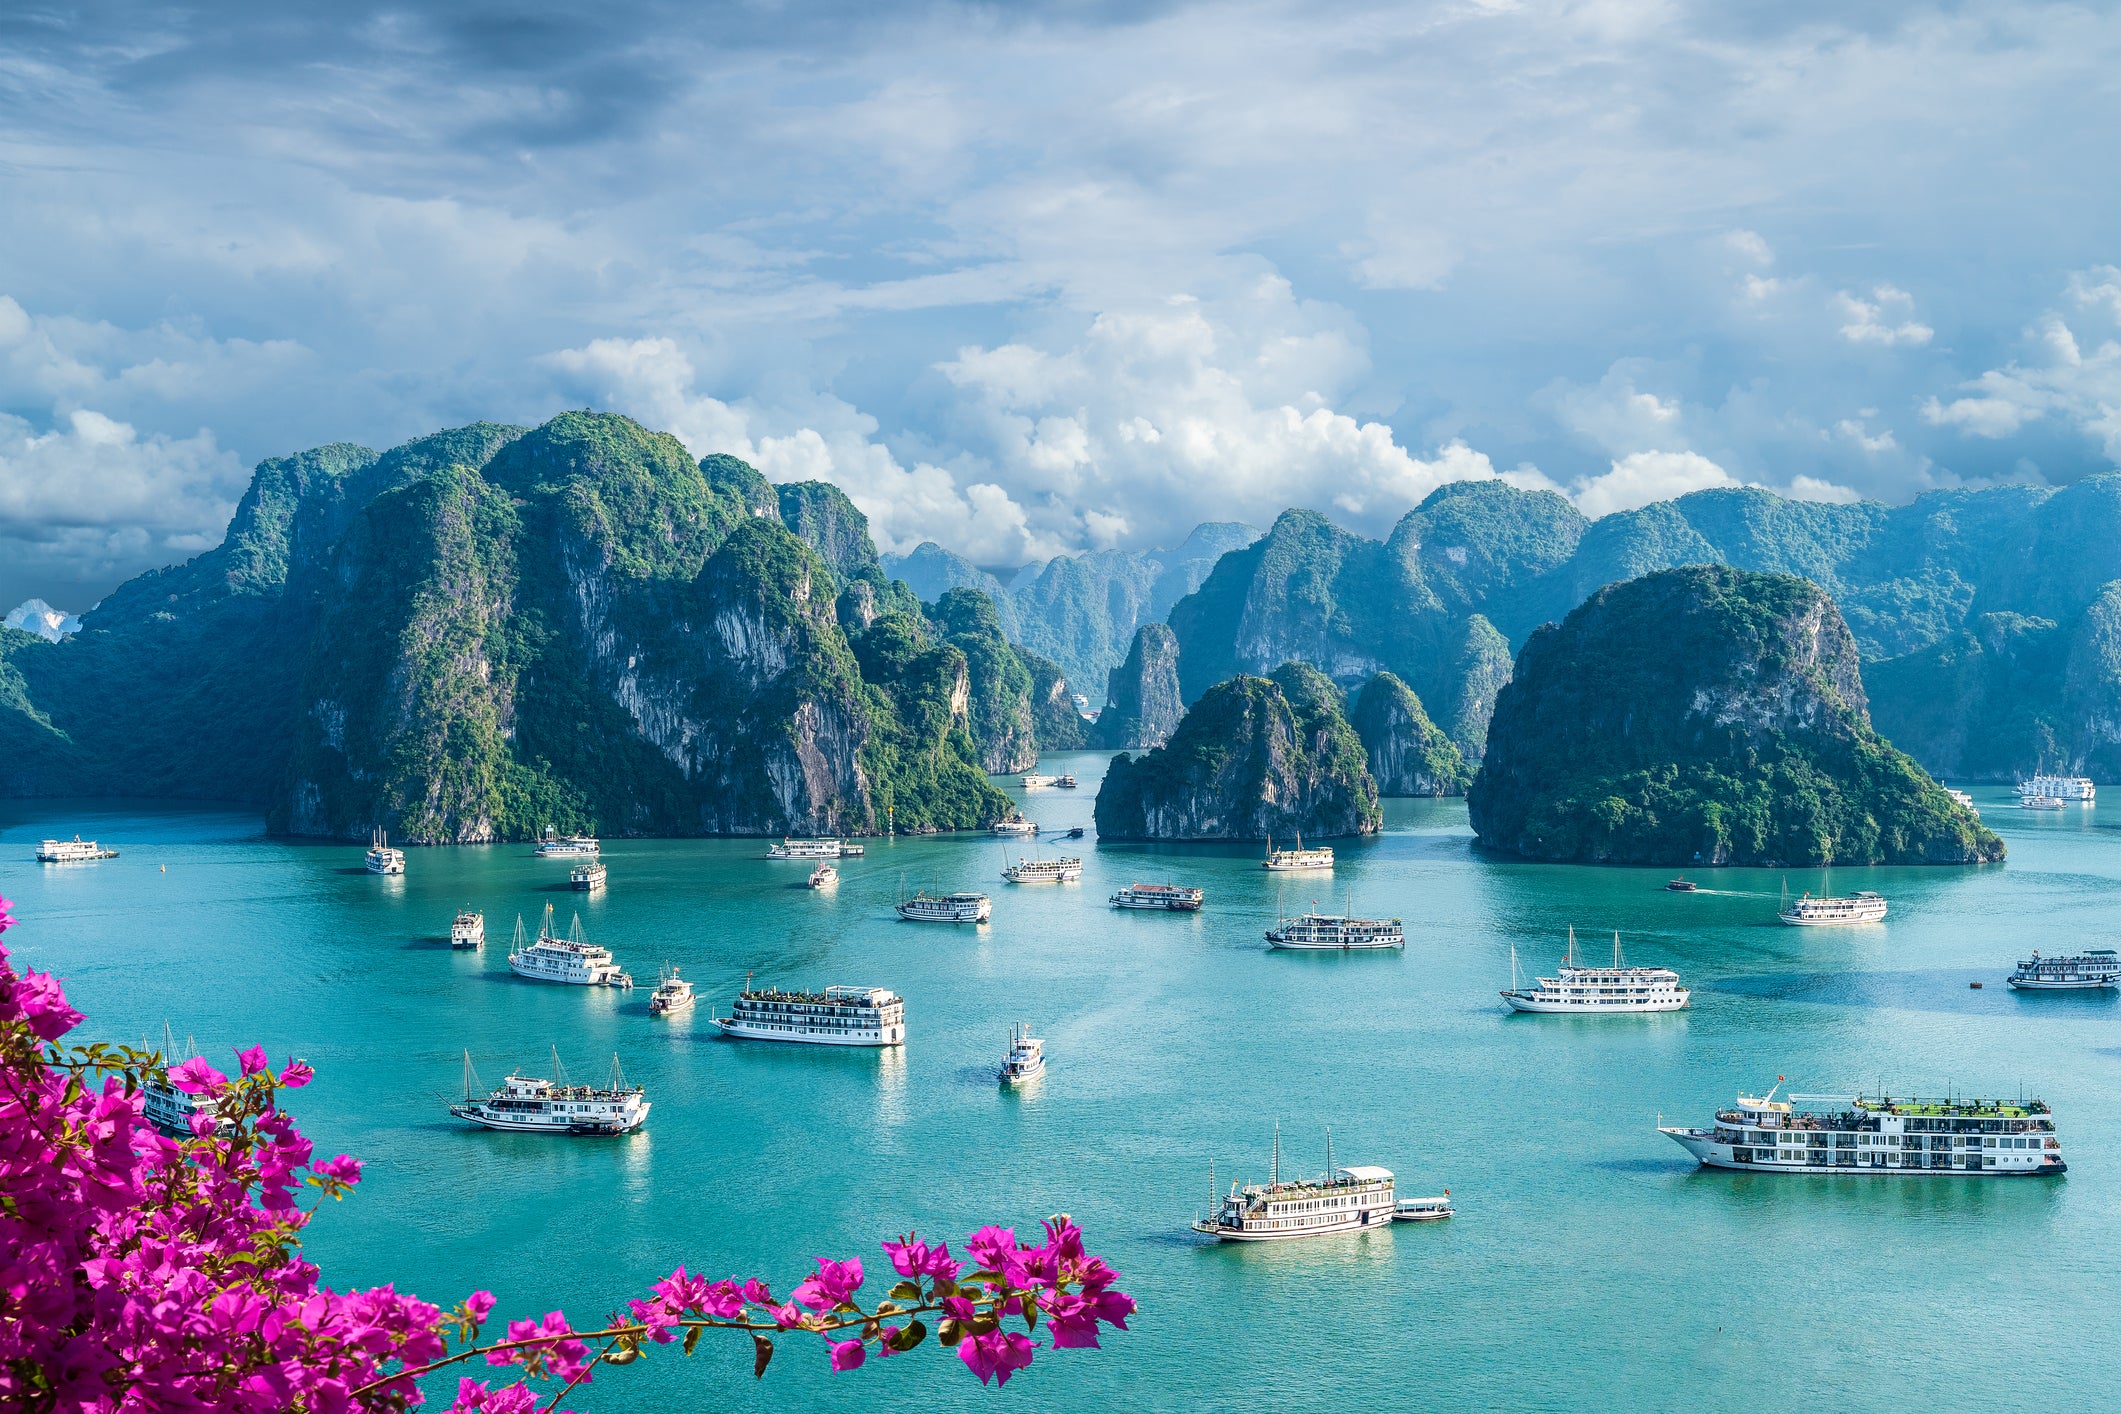 Halong Bay is known for its azure waters and limestone rock islands